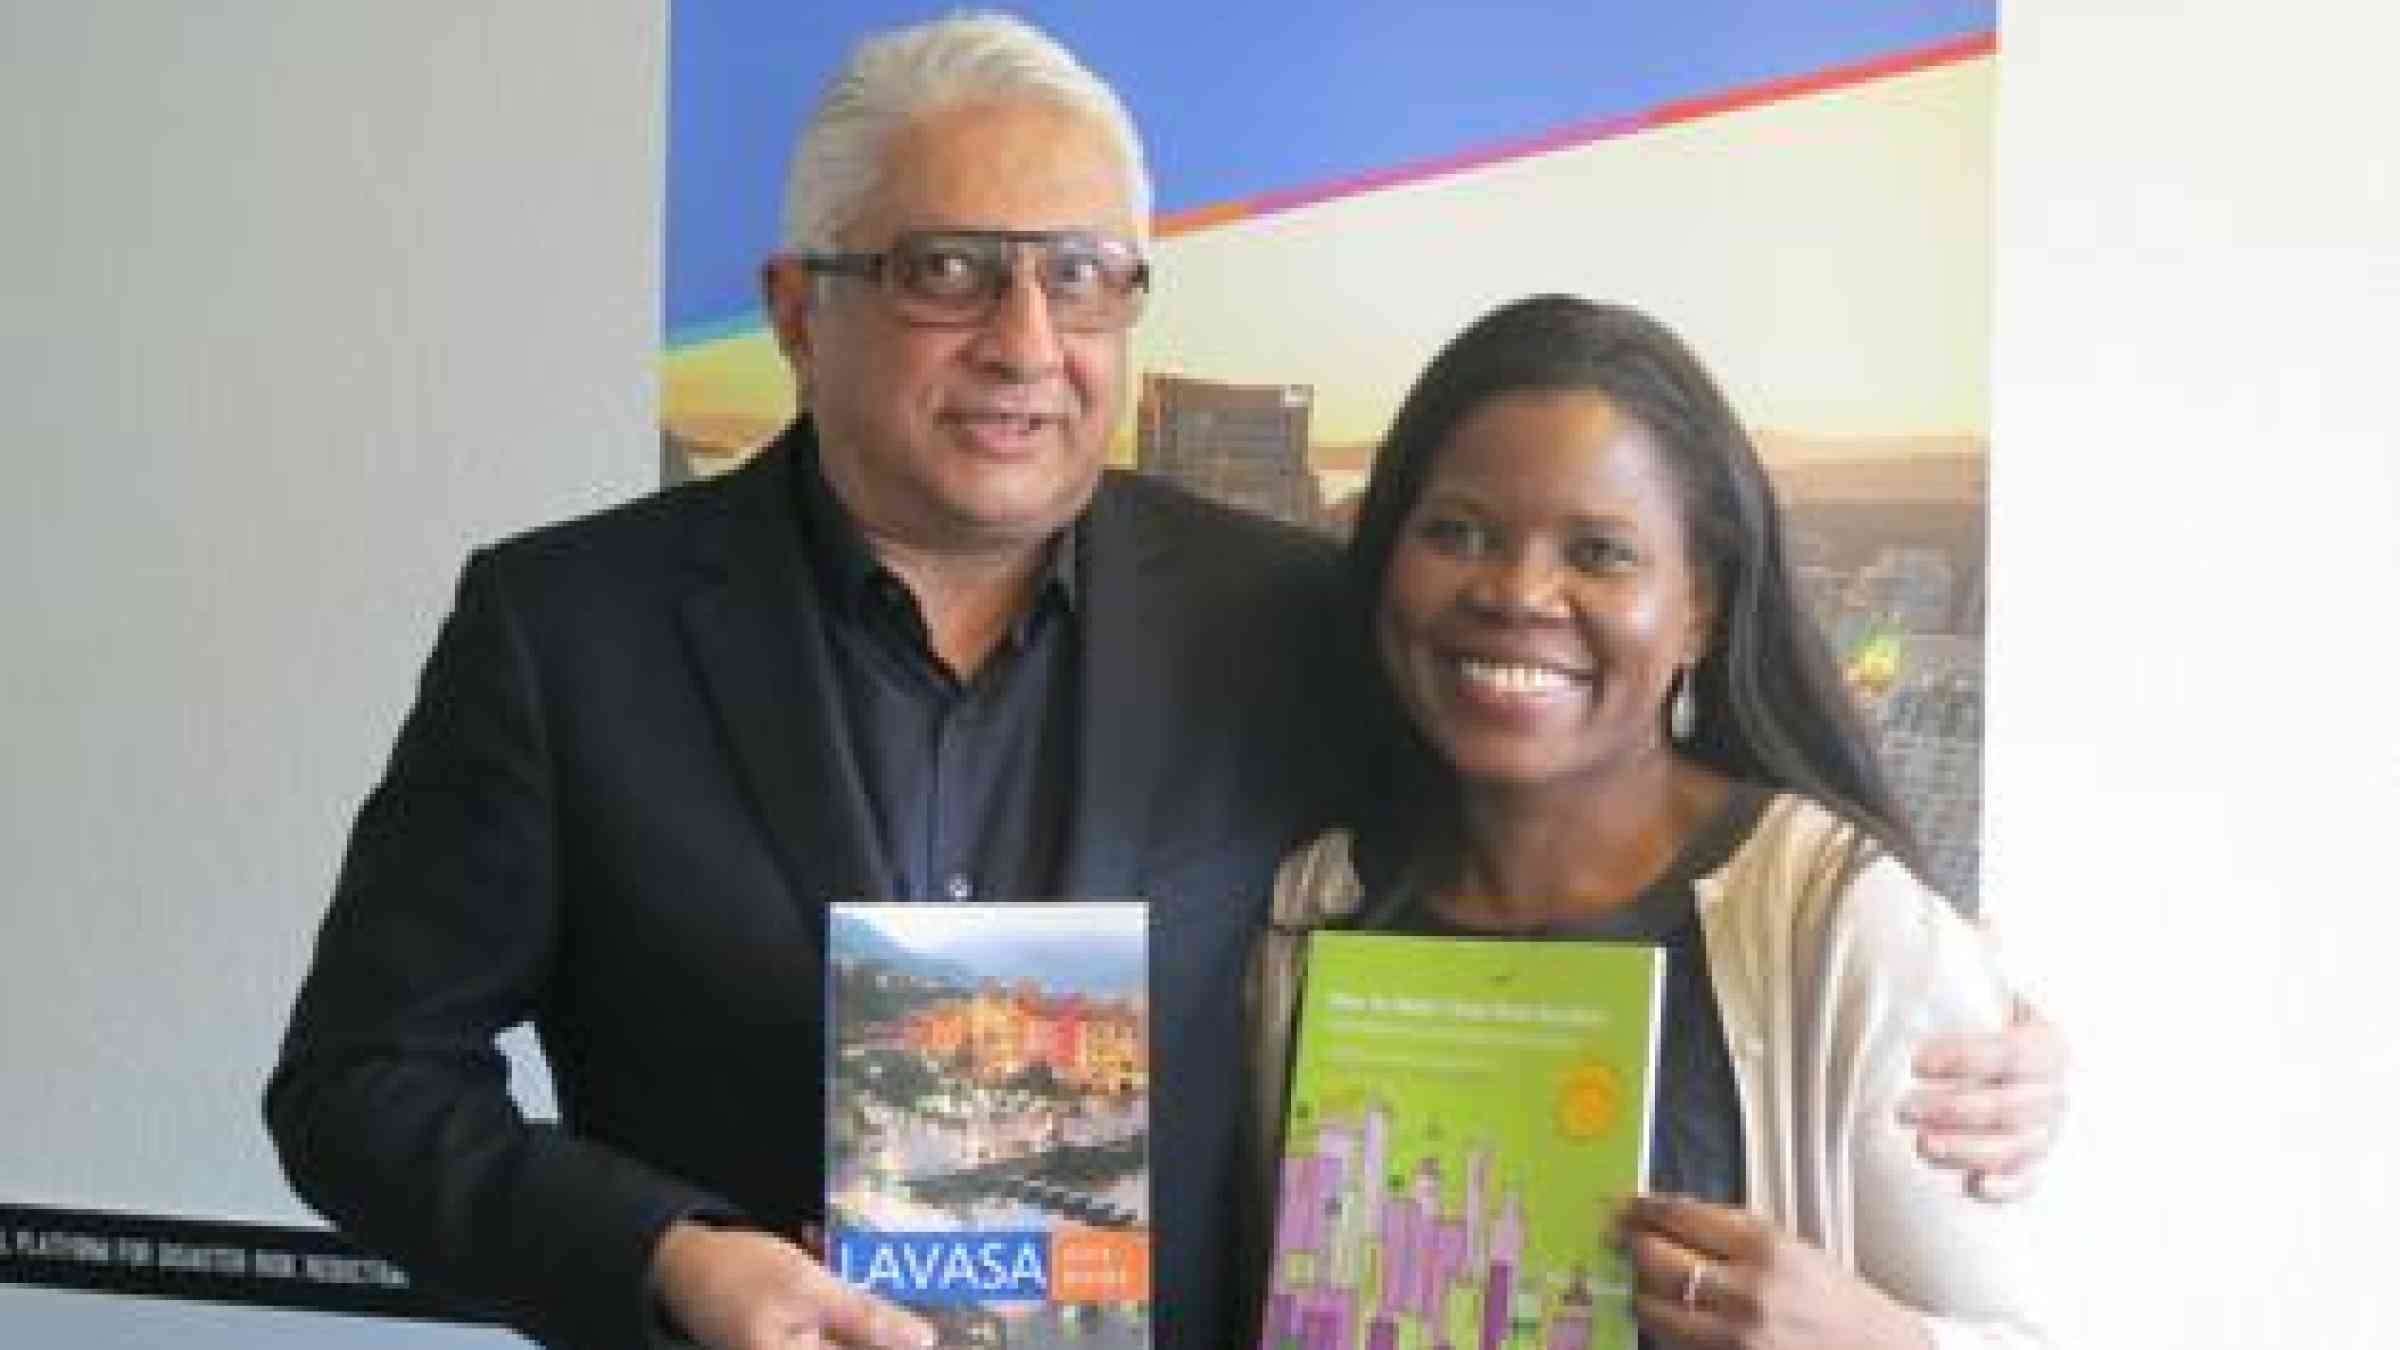 Ajit Gulabchand, the Chairman and Managing Director of the Hindustan Construction Co, and UNISDR focal point for business partnerships, Kiki Lawal, promoting resilient cities.